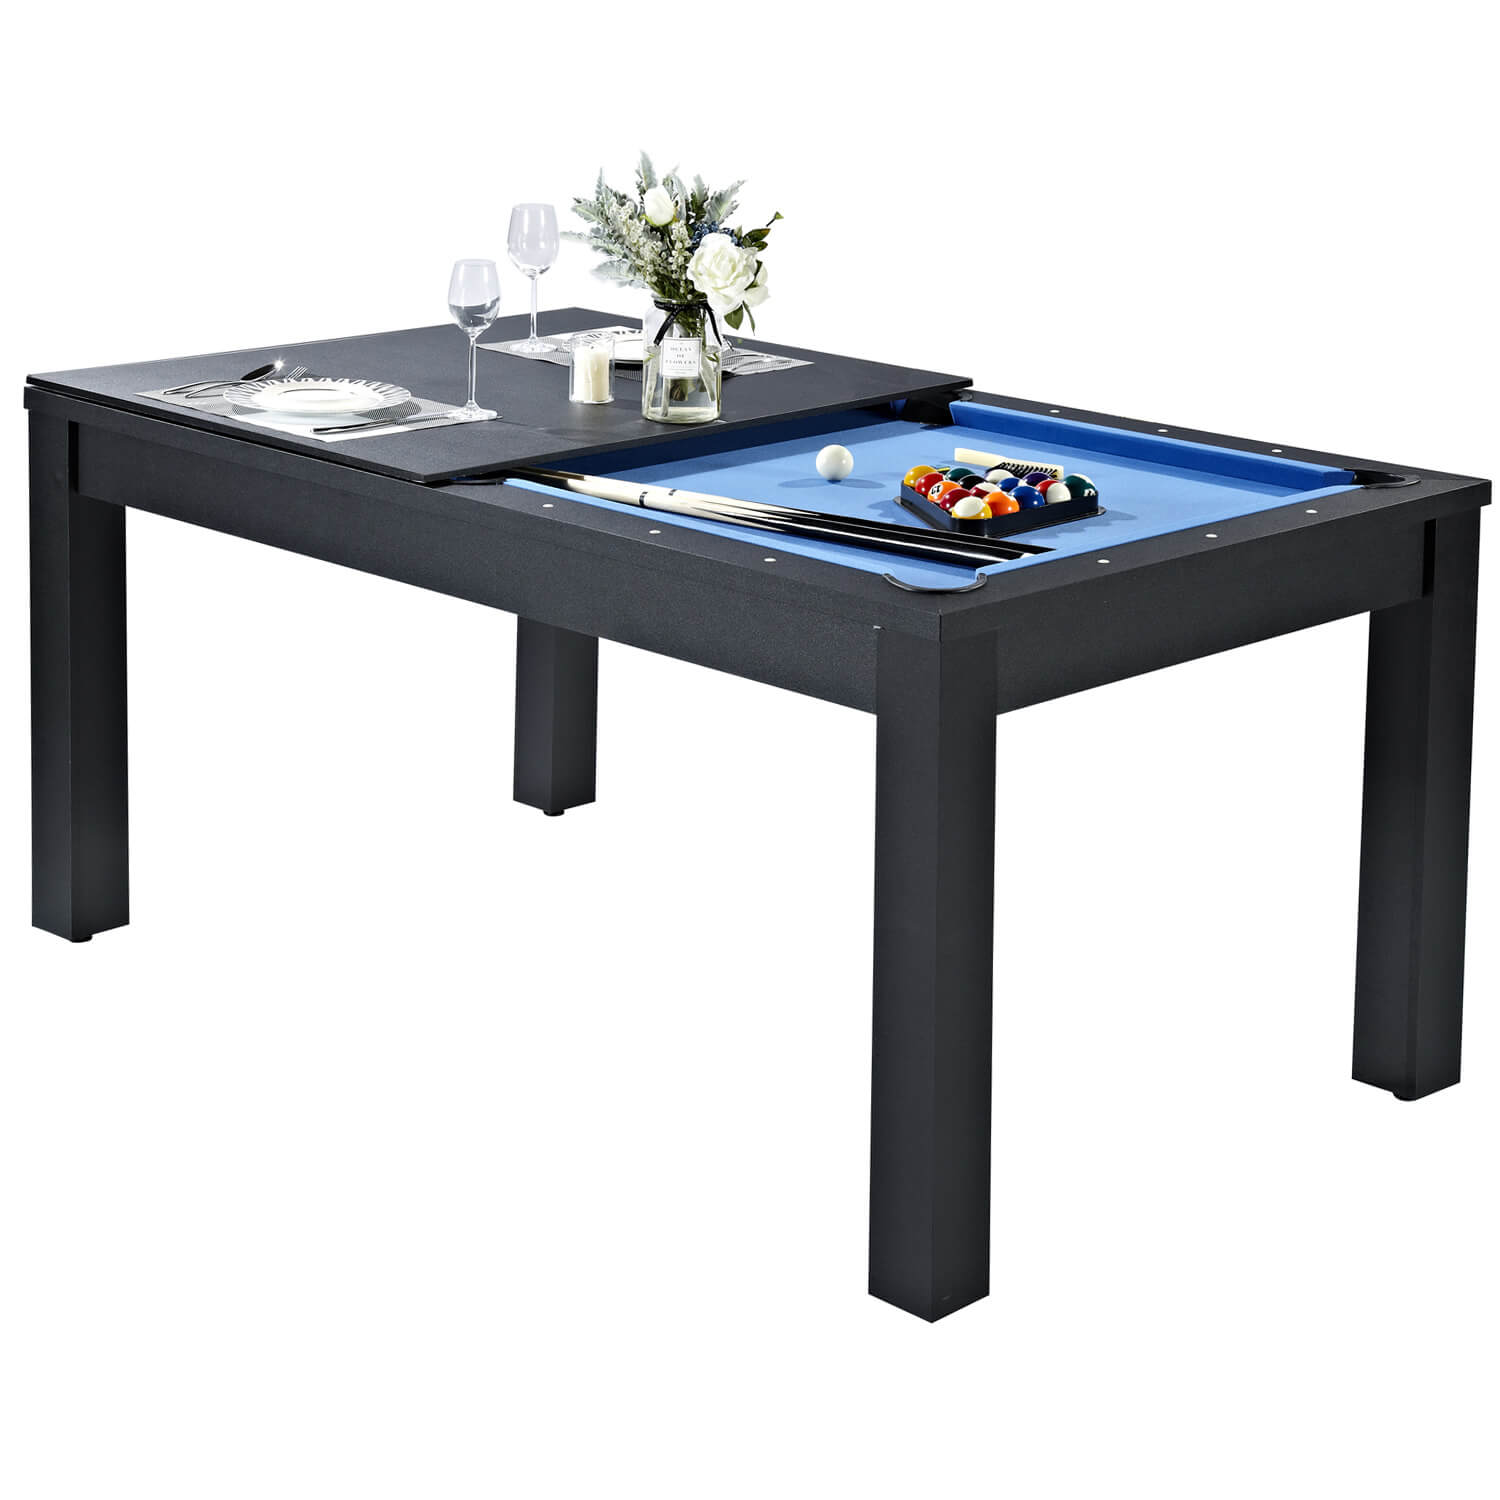 Pureline 6ft Pool Dining Table with Table Tennis Top | Liberty Games